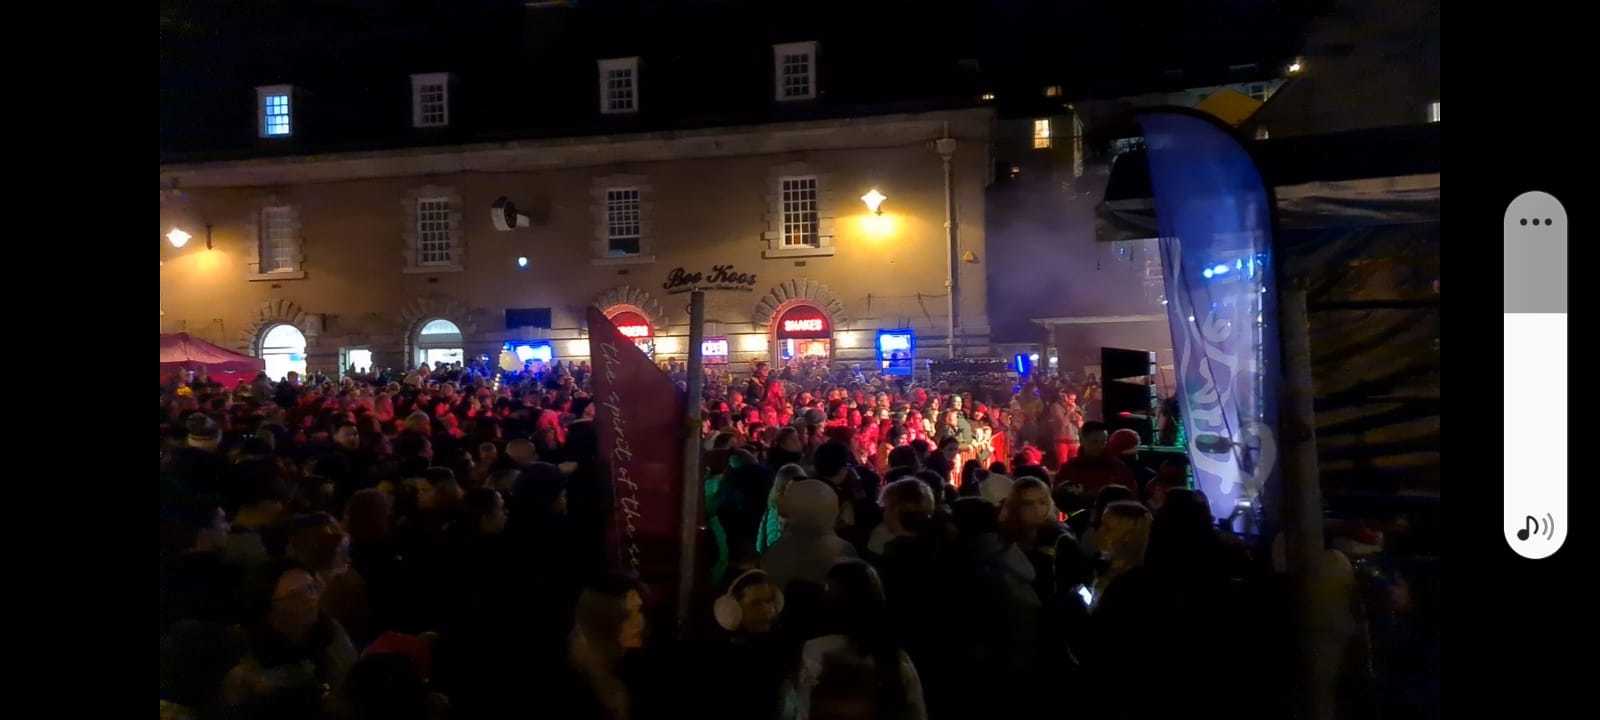 Scenes from Thursdays switch-on